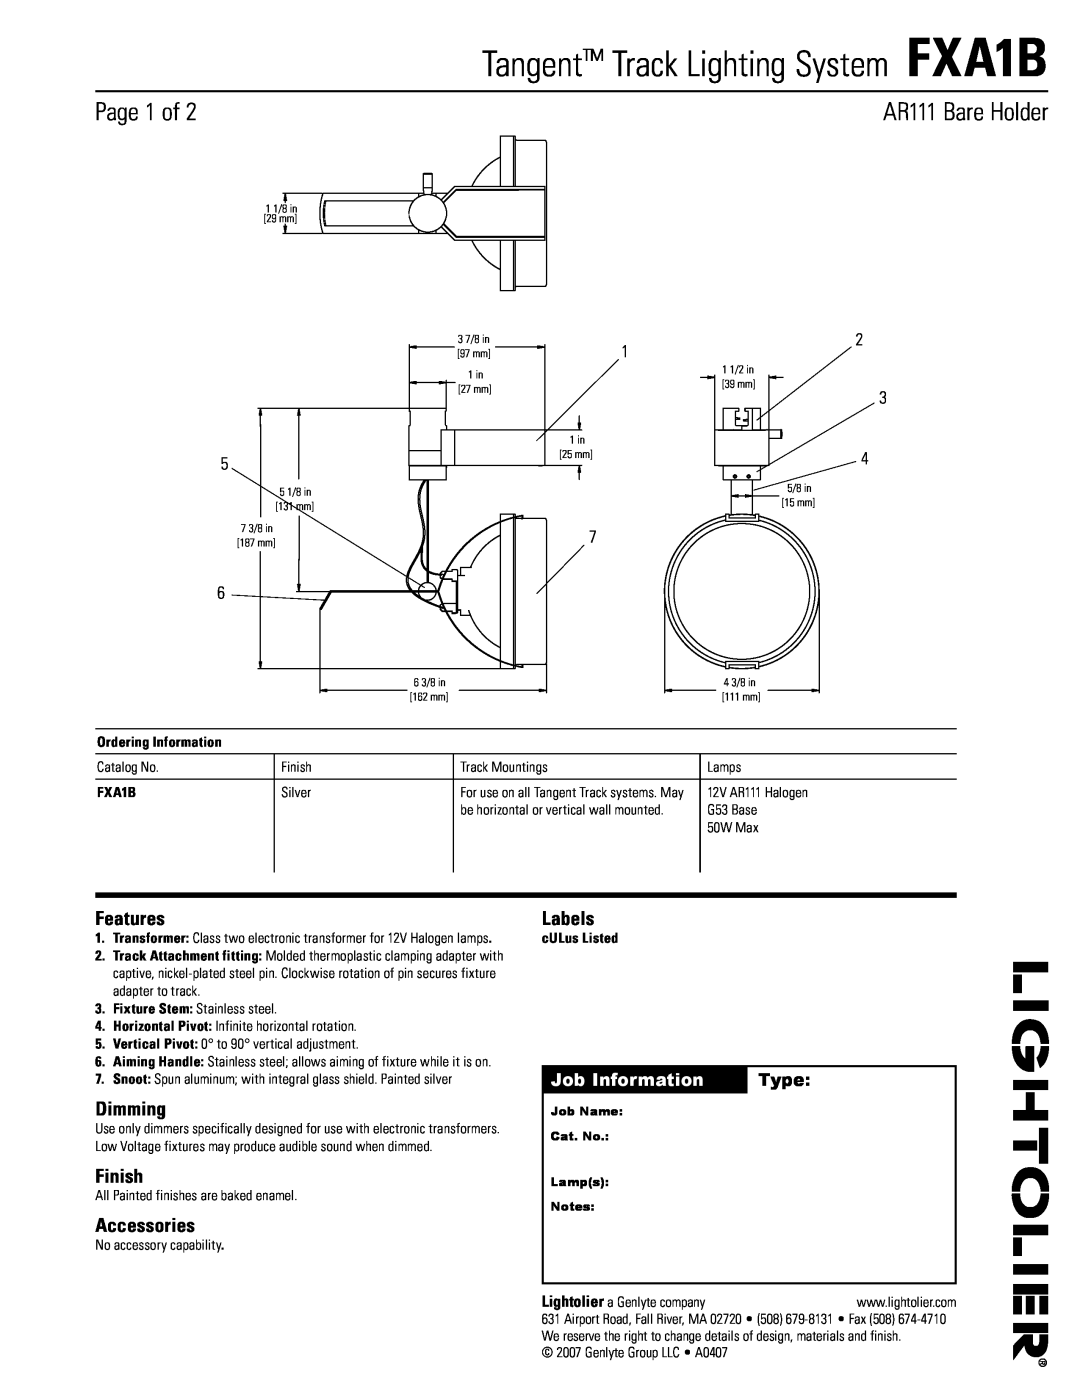 Lightolier manual Tangent Track Lighting System FXA1B, Page of, AR111 Bare Holder, Job Information, Type, Features 